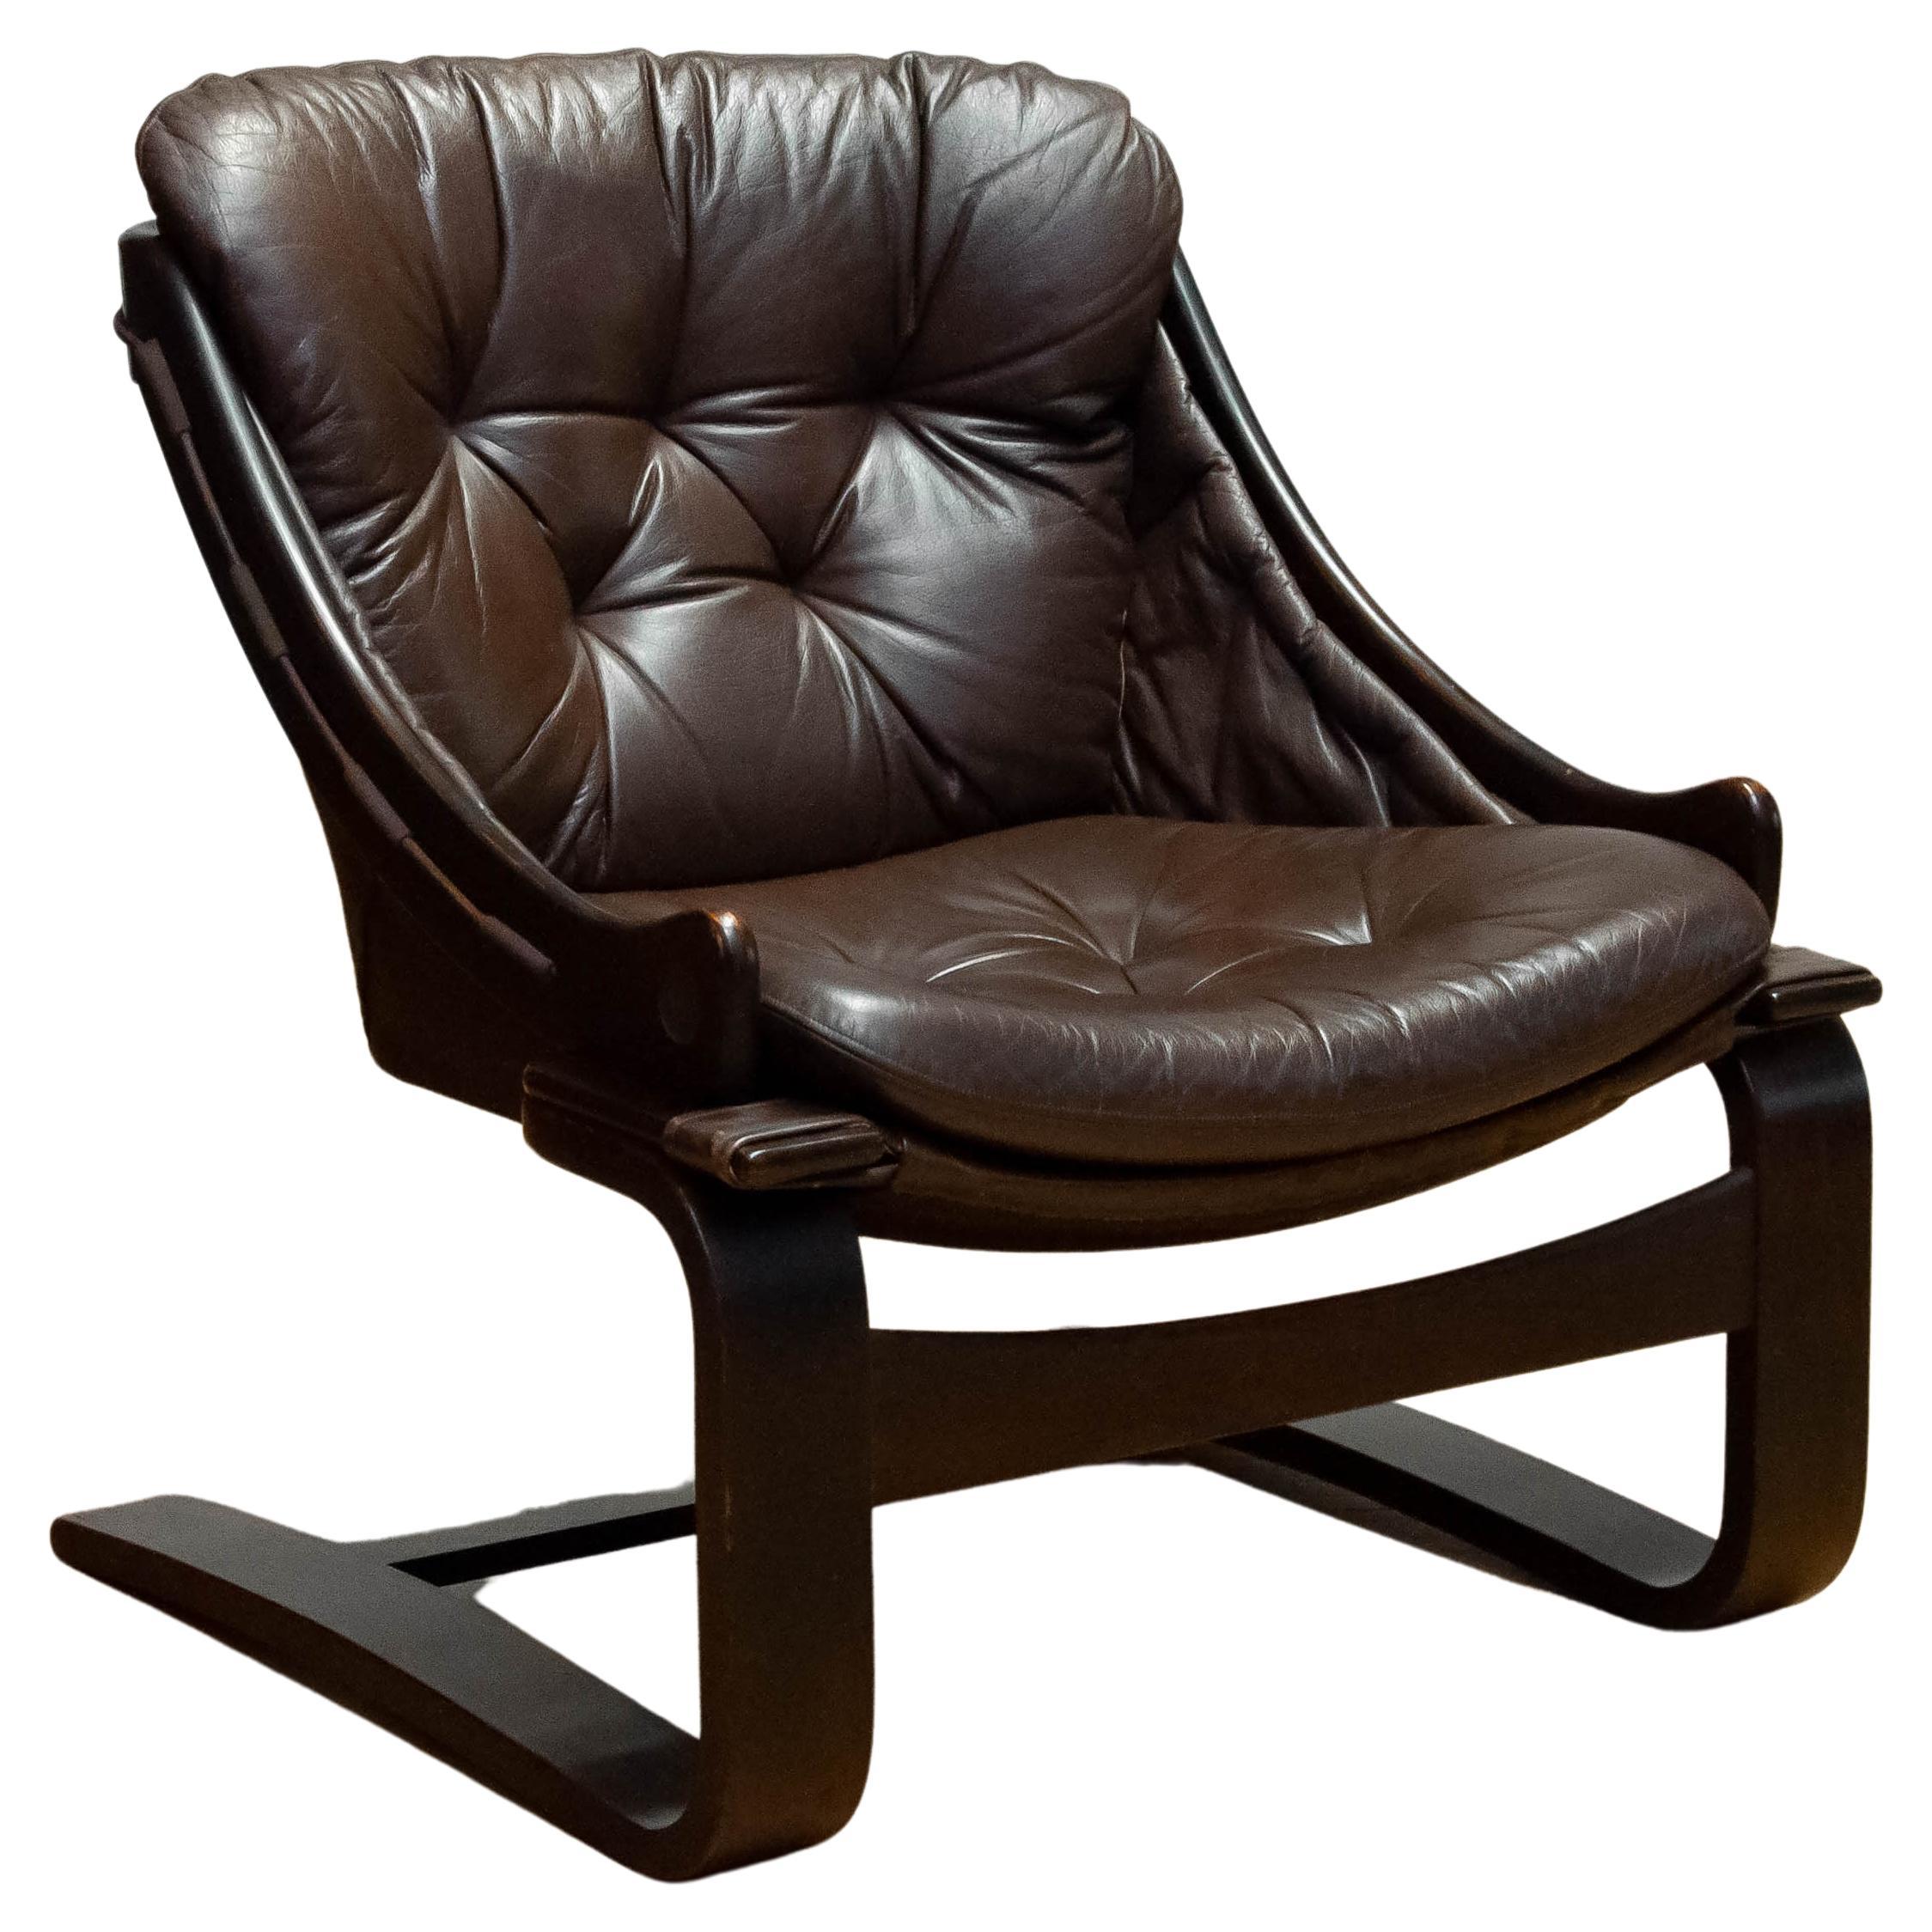 1970s Brown Leather Lounge Chair Model 'Krona' By Ake Fribytter For Nelo, Sweden For Sale